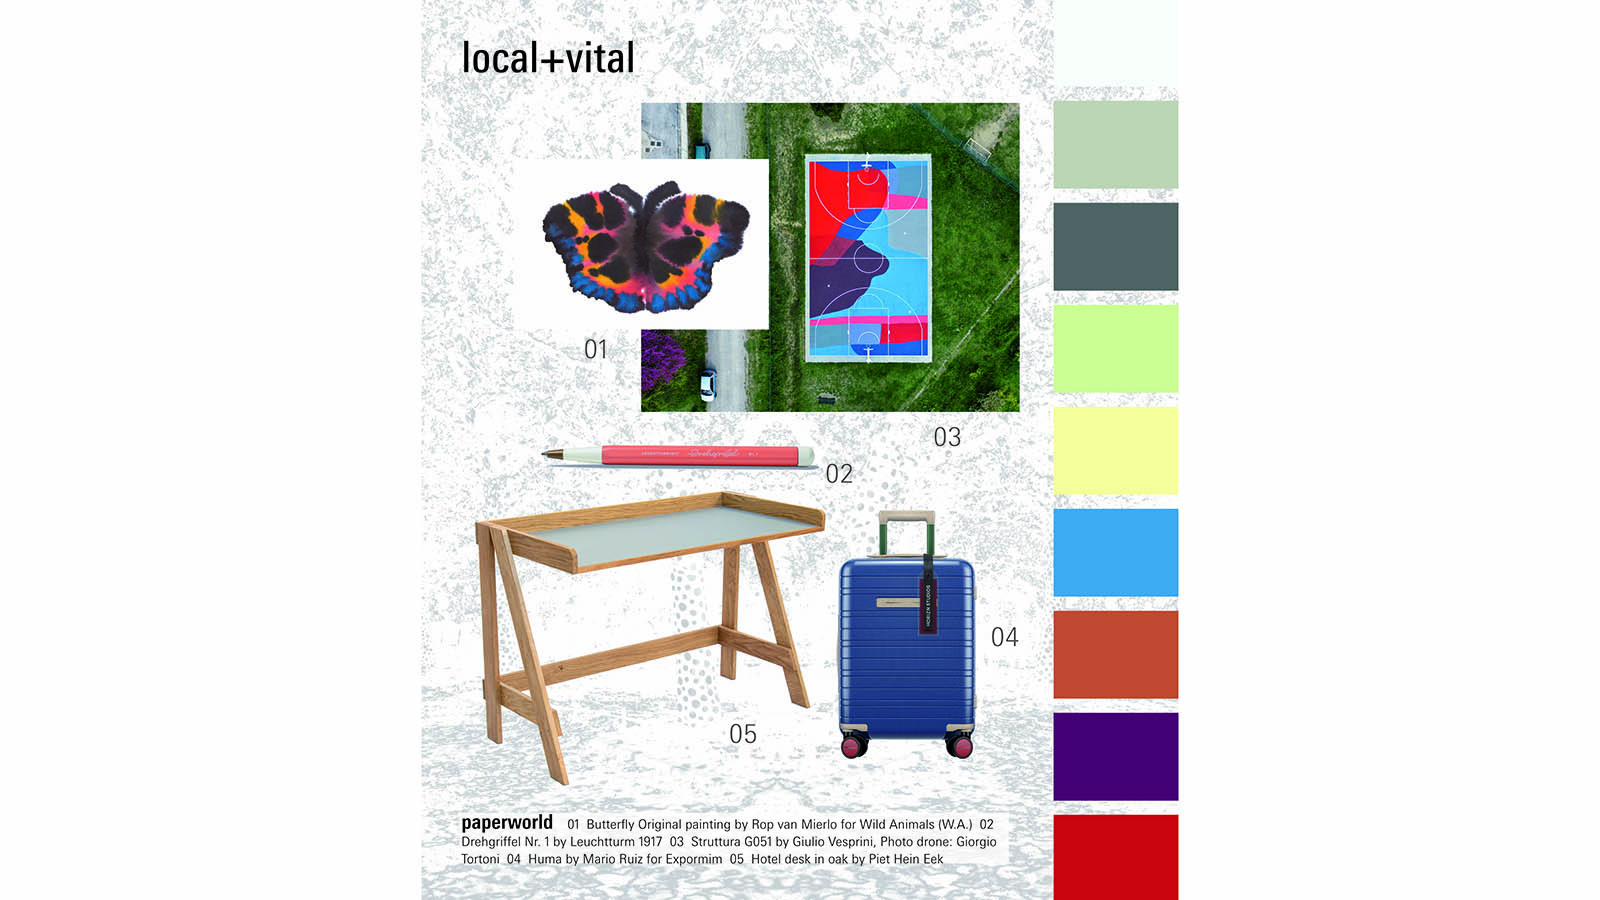 local+vital: closeness and cheerfulness through local products and characteristic design